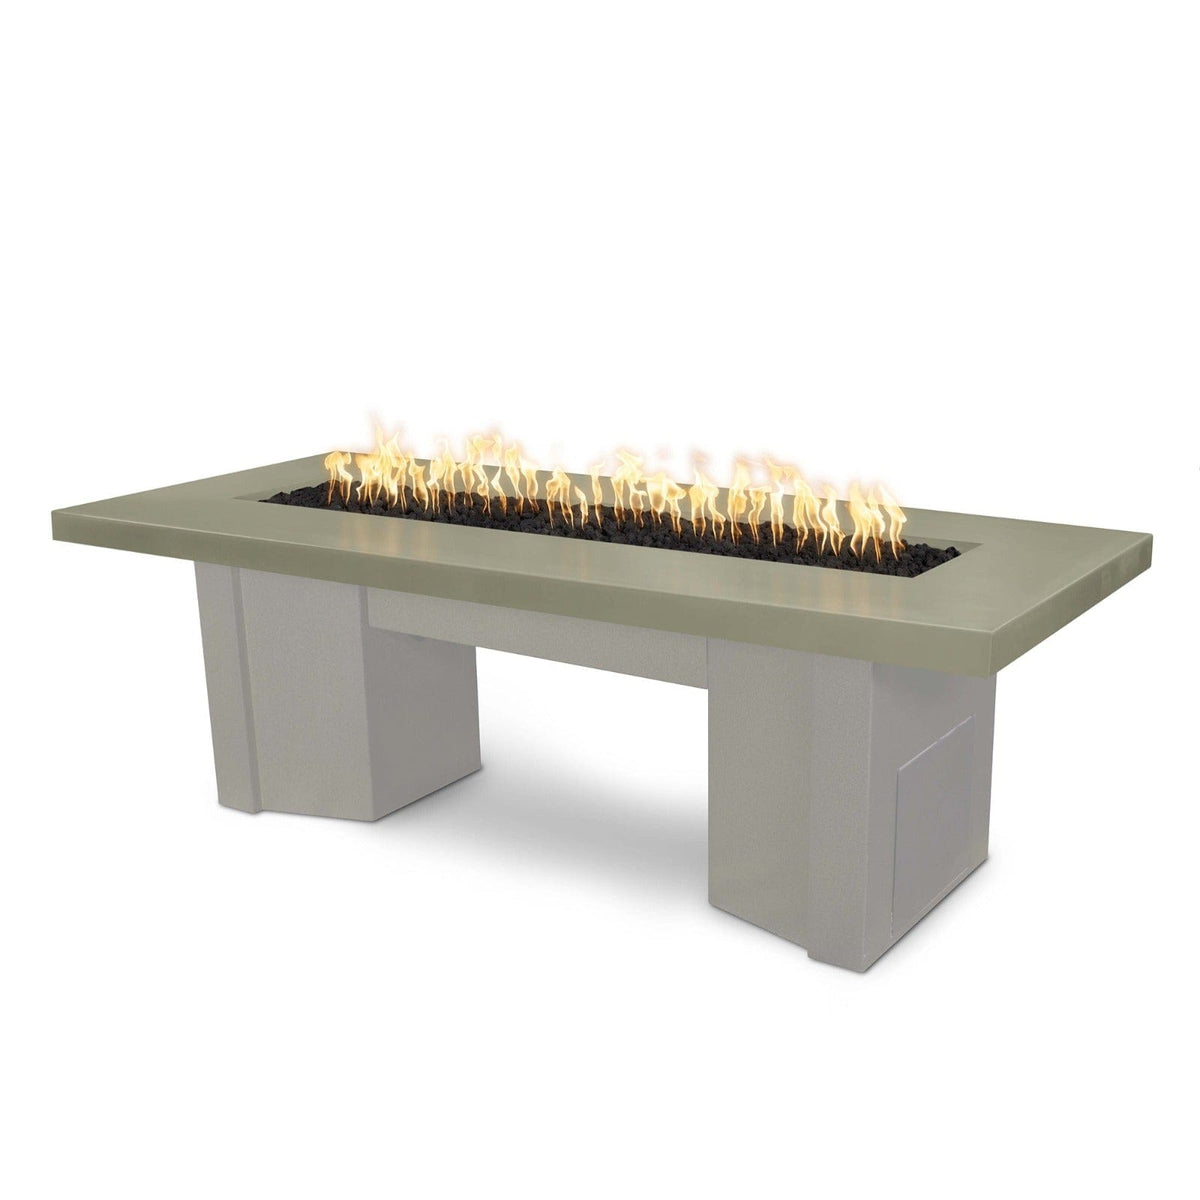 The Outdoor Plus Fire Features Ash (-ASH) / Pewter Powder Coated Steel (-PEW) The Outdoor Plus 60&quot; Alameda Fire Table Smooth Concrete in Liquid Propane - Flame Sense System with Push Button Spark Igniter / OPT-ALMGFRC60FSEN-LP